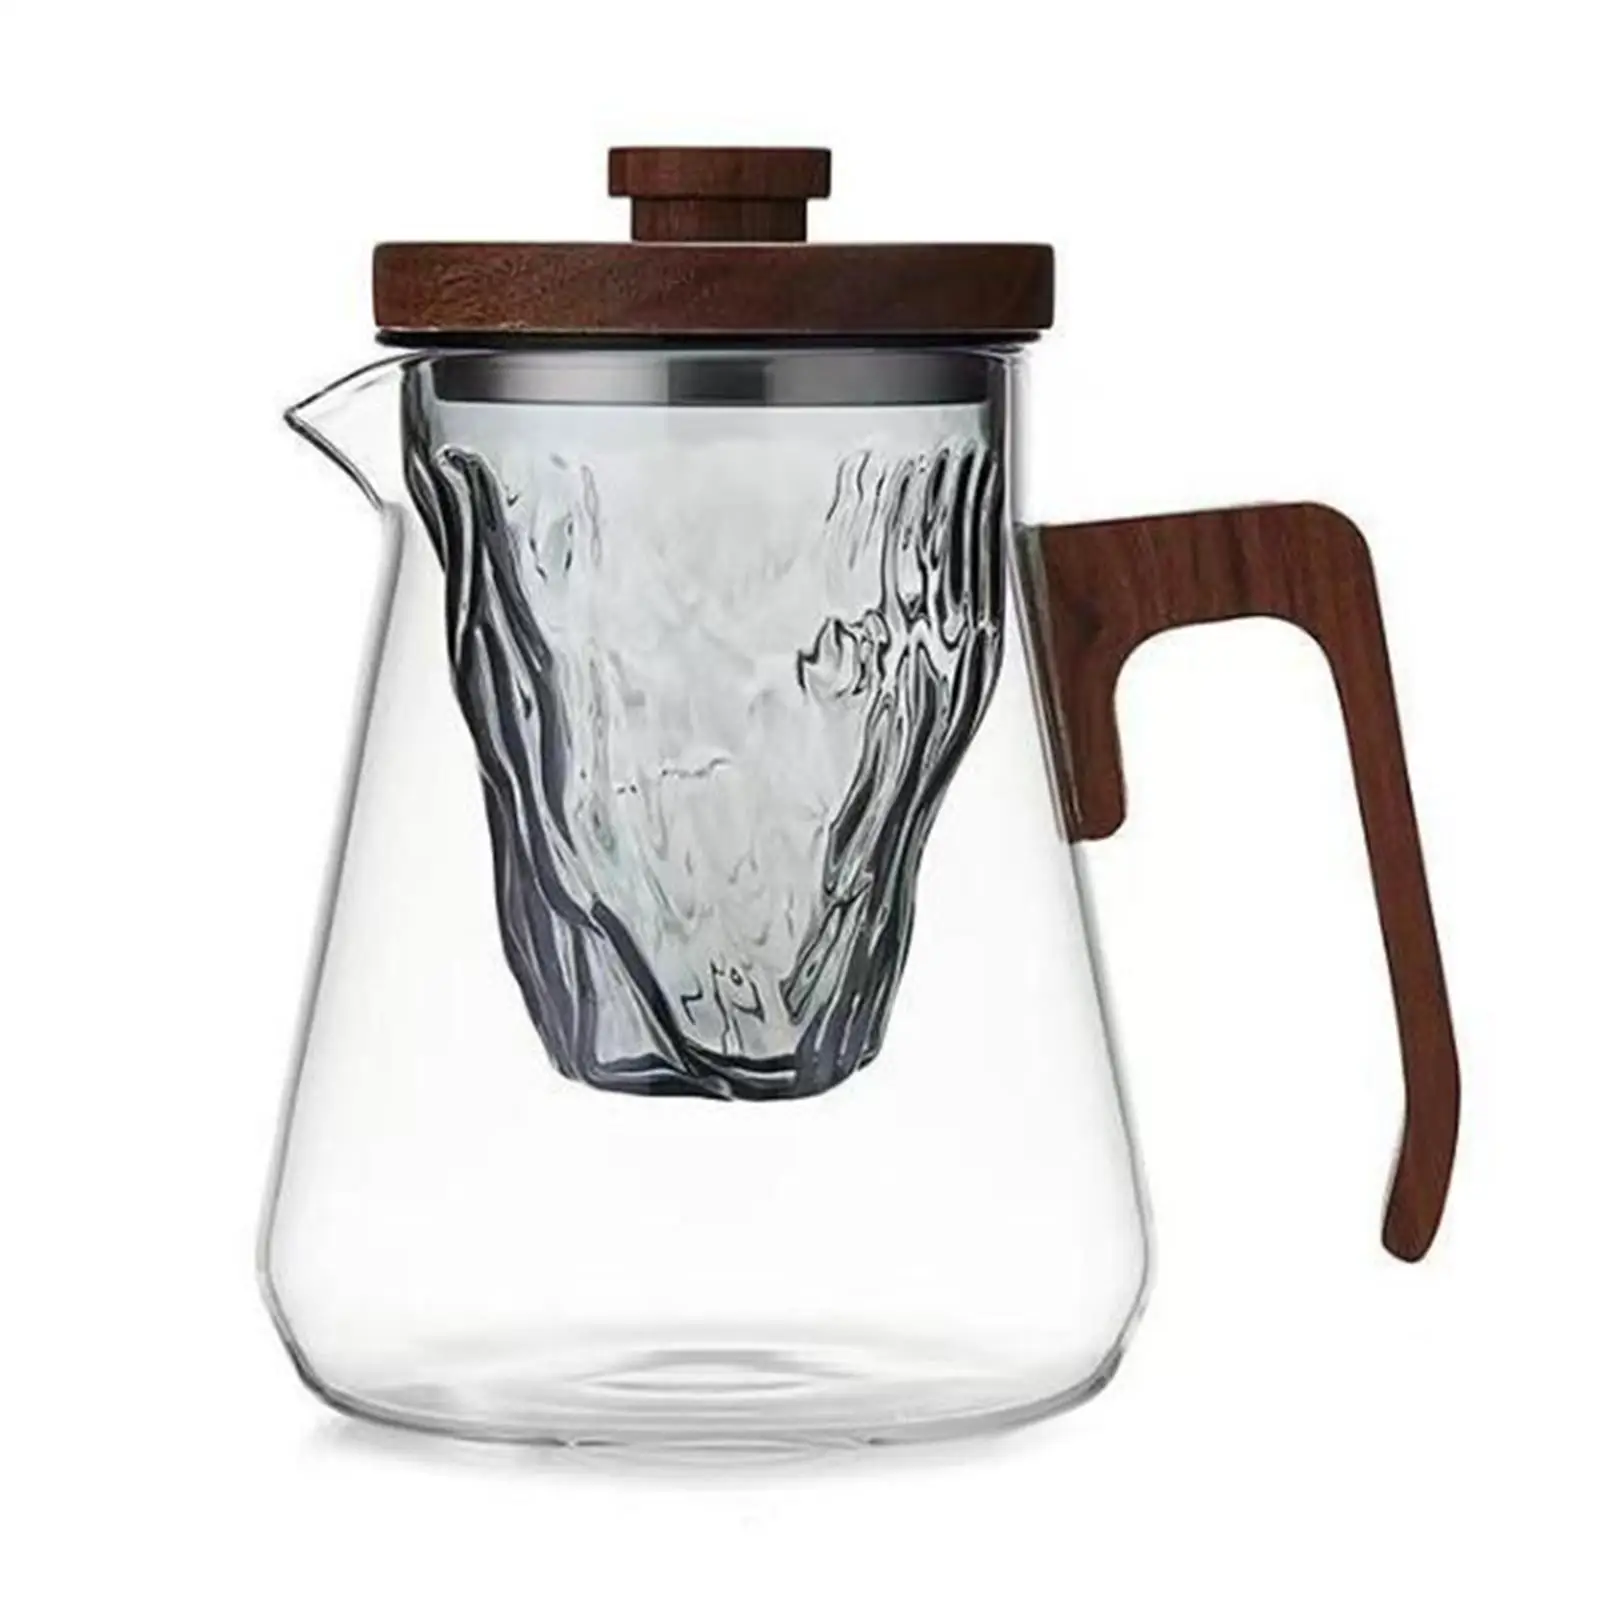 Portable Glass Tea Kettle with Removable Infuser for Household Kitchen Restaurant